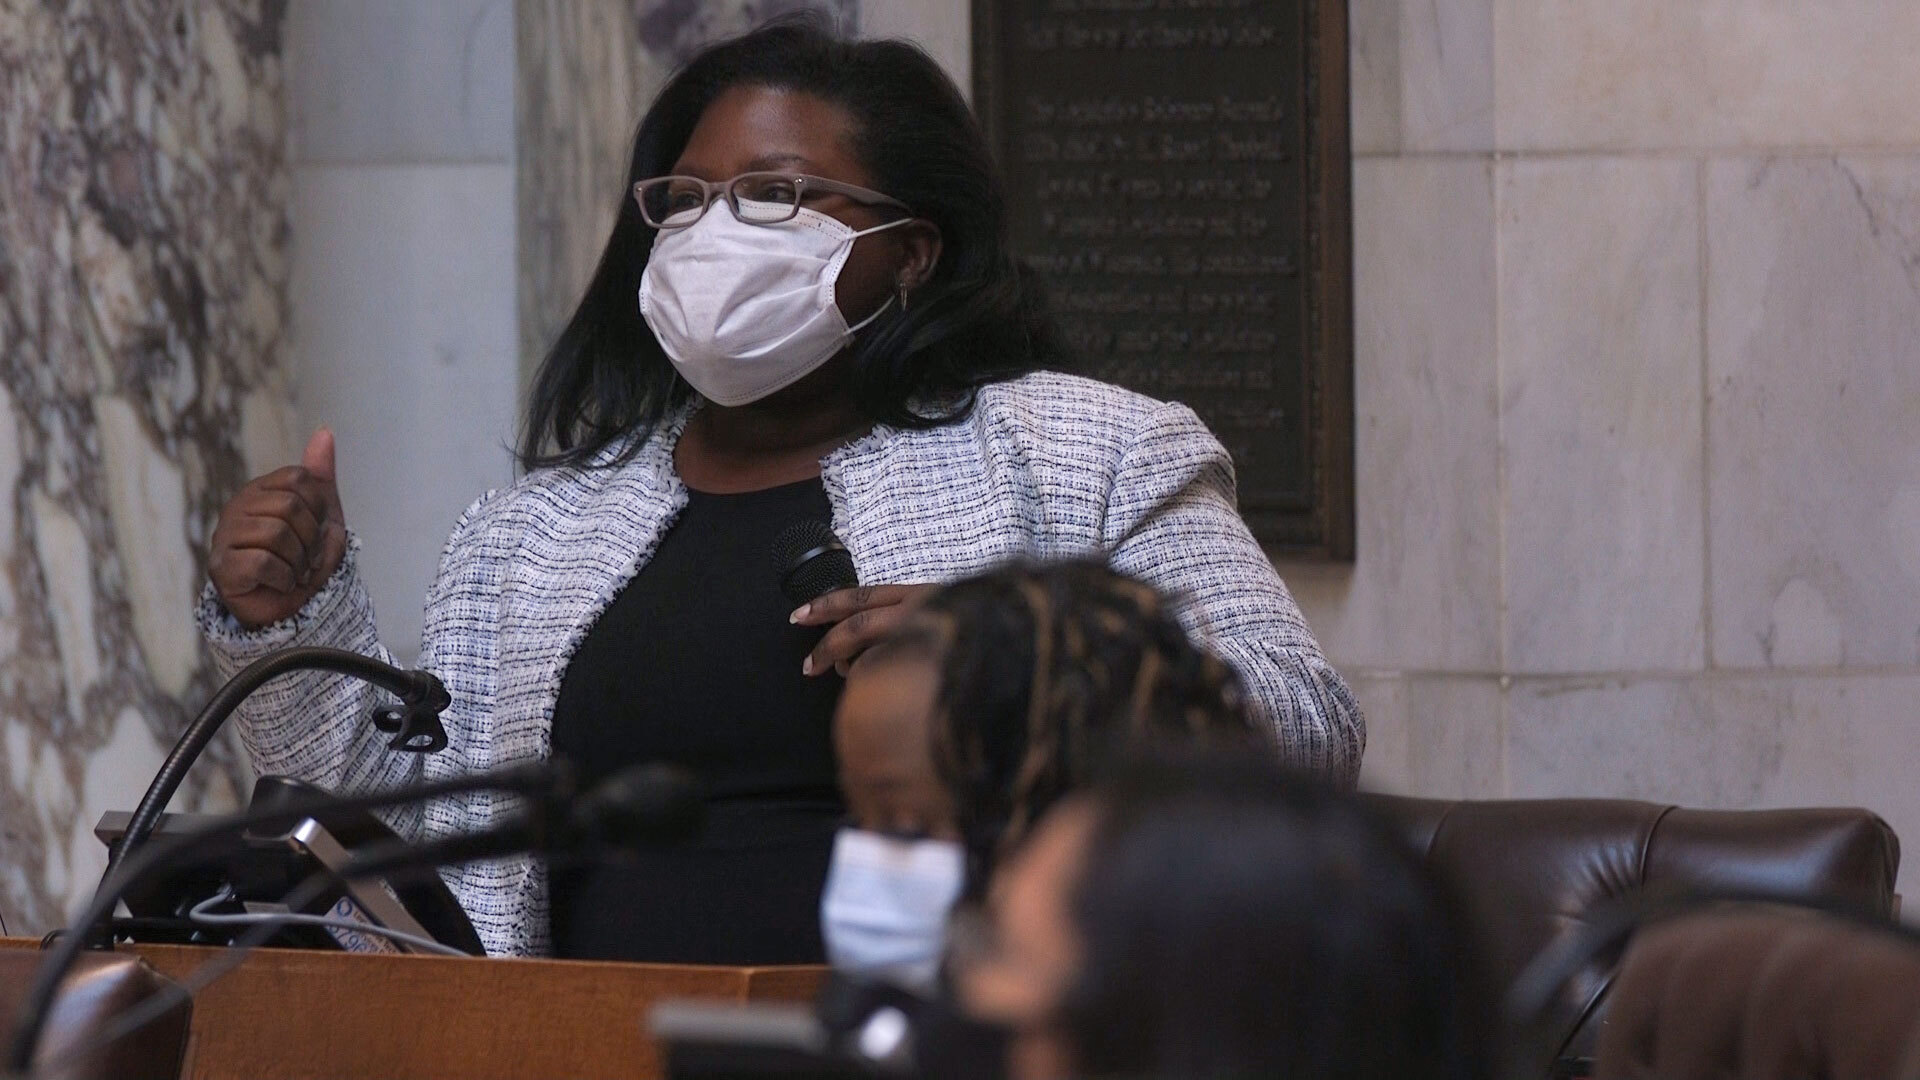 Rep. LaKeshia Myers stands and speaks in the Wisconsin Assembly chambers.